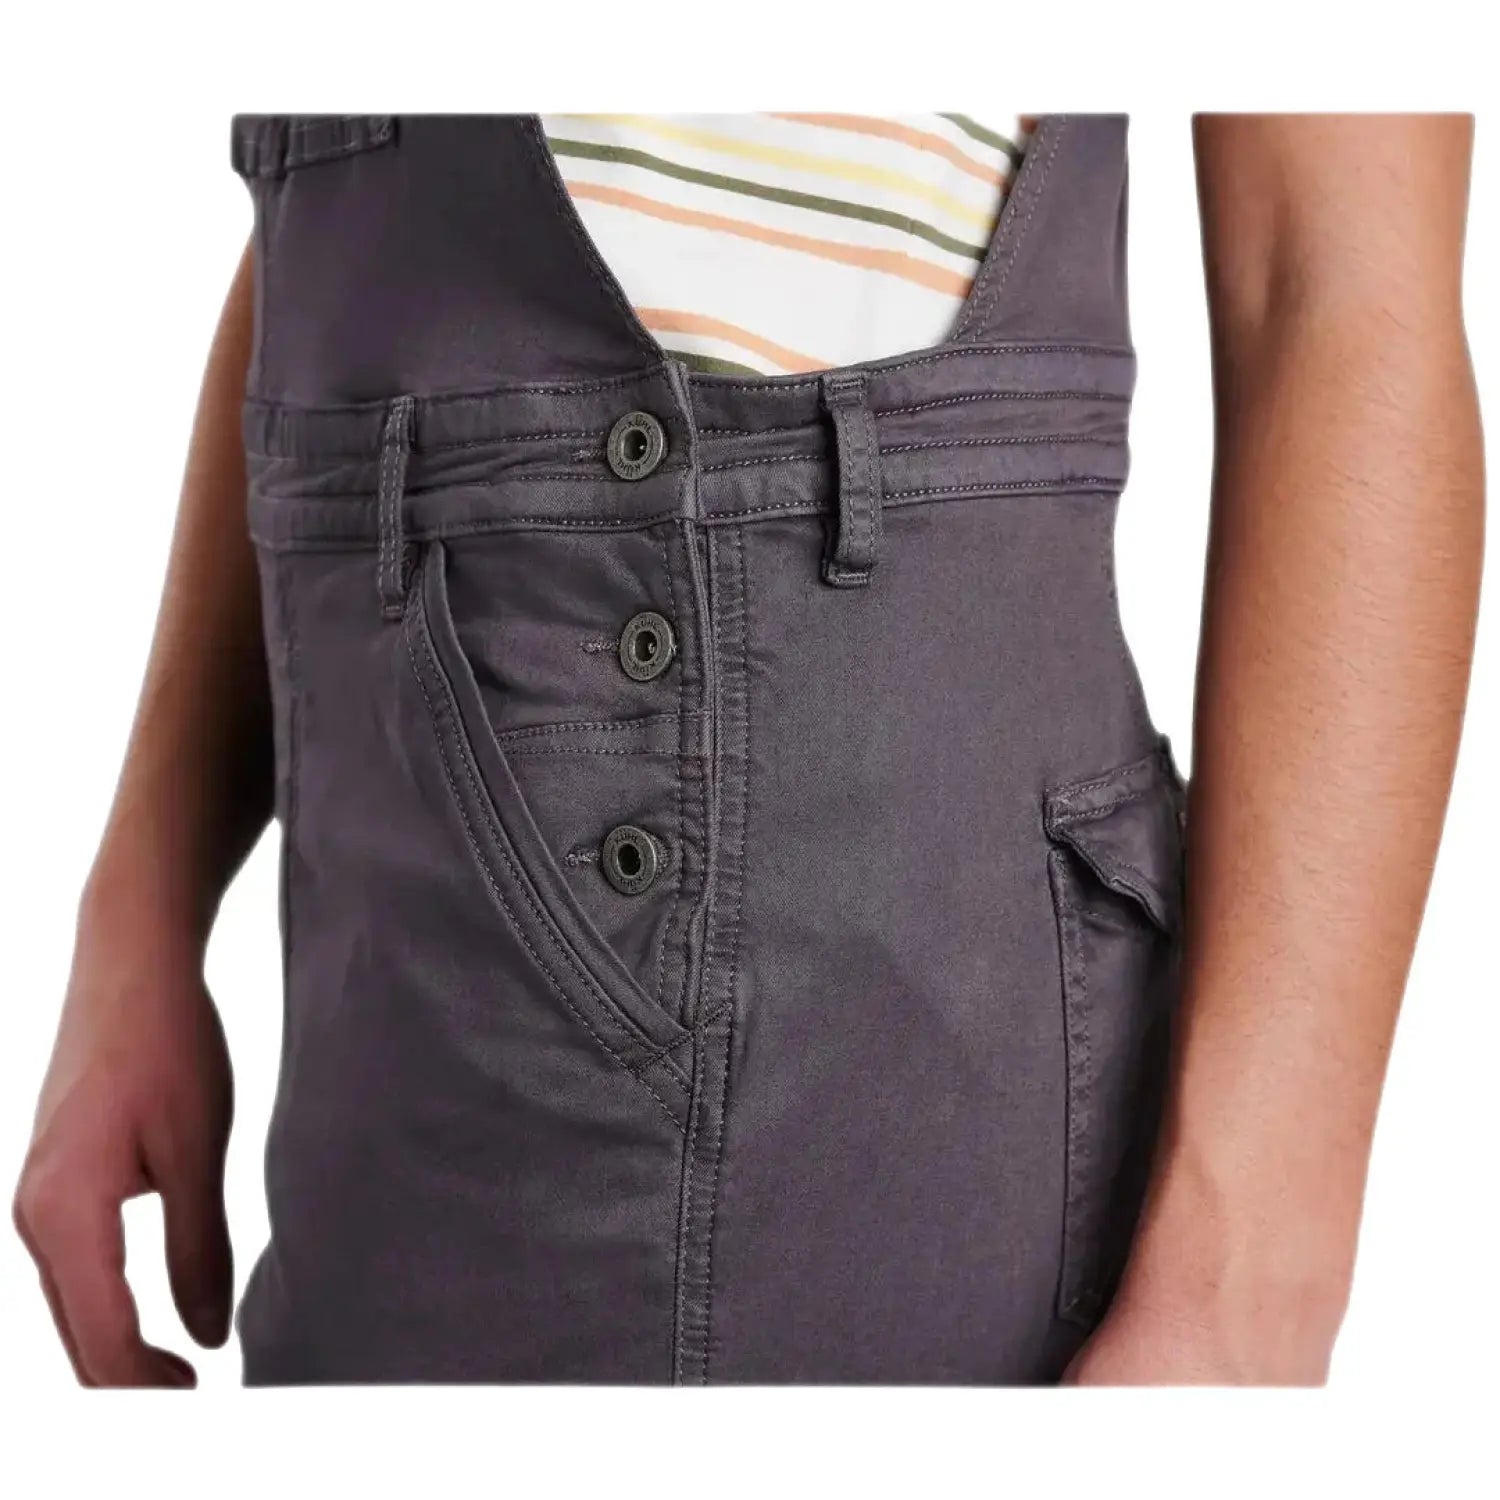 KÜHL Women's KULTIVATR™ Overall shown in the Pavement color option. Side view.